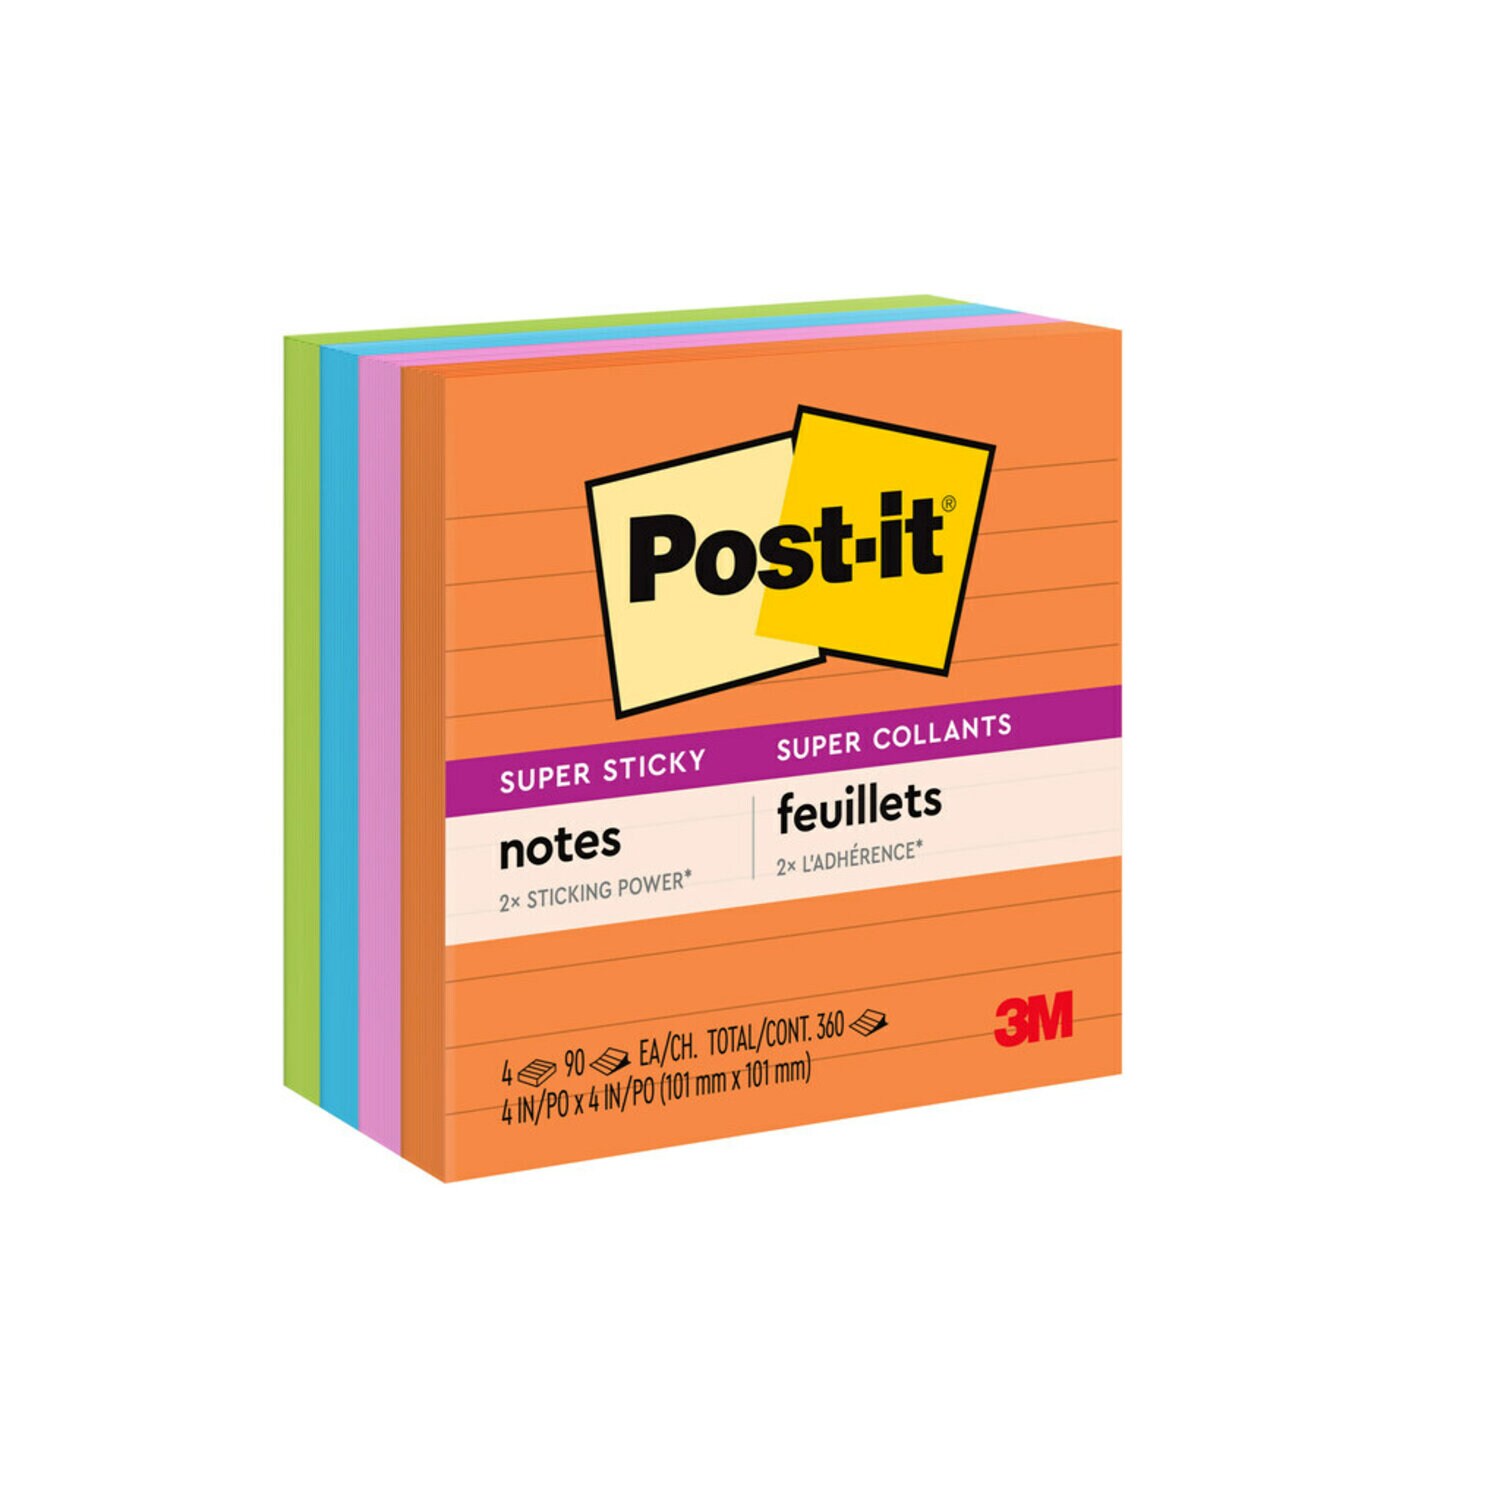 7010372293 - Post-it Super Sticky Notes 675-4SSUC, 4 in x 4 in (101 mm x 101 mm), Energy Boost Collection, Lined, 4 Pads/Pk